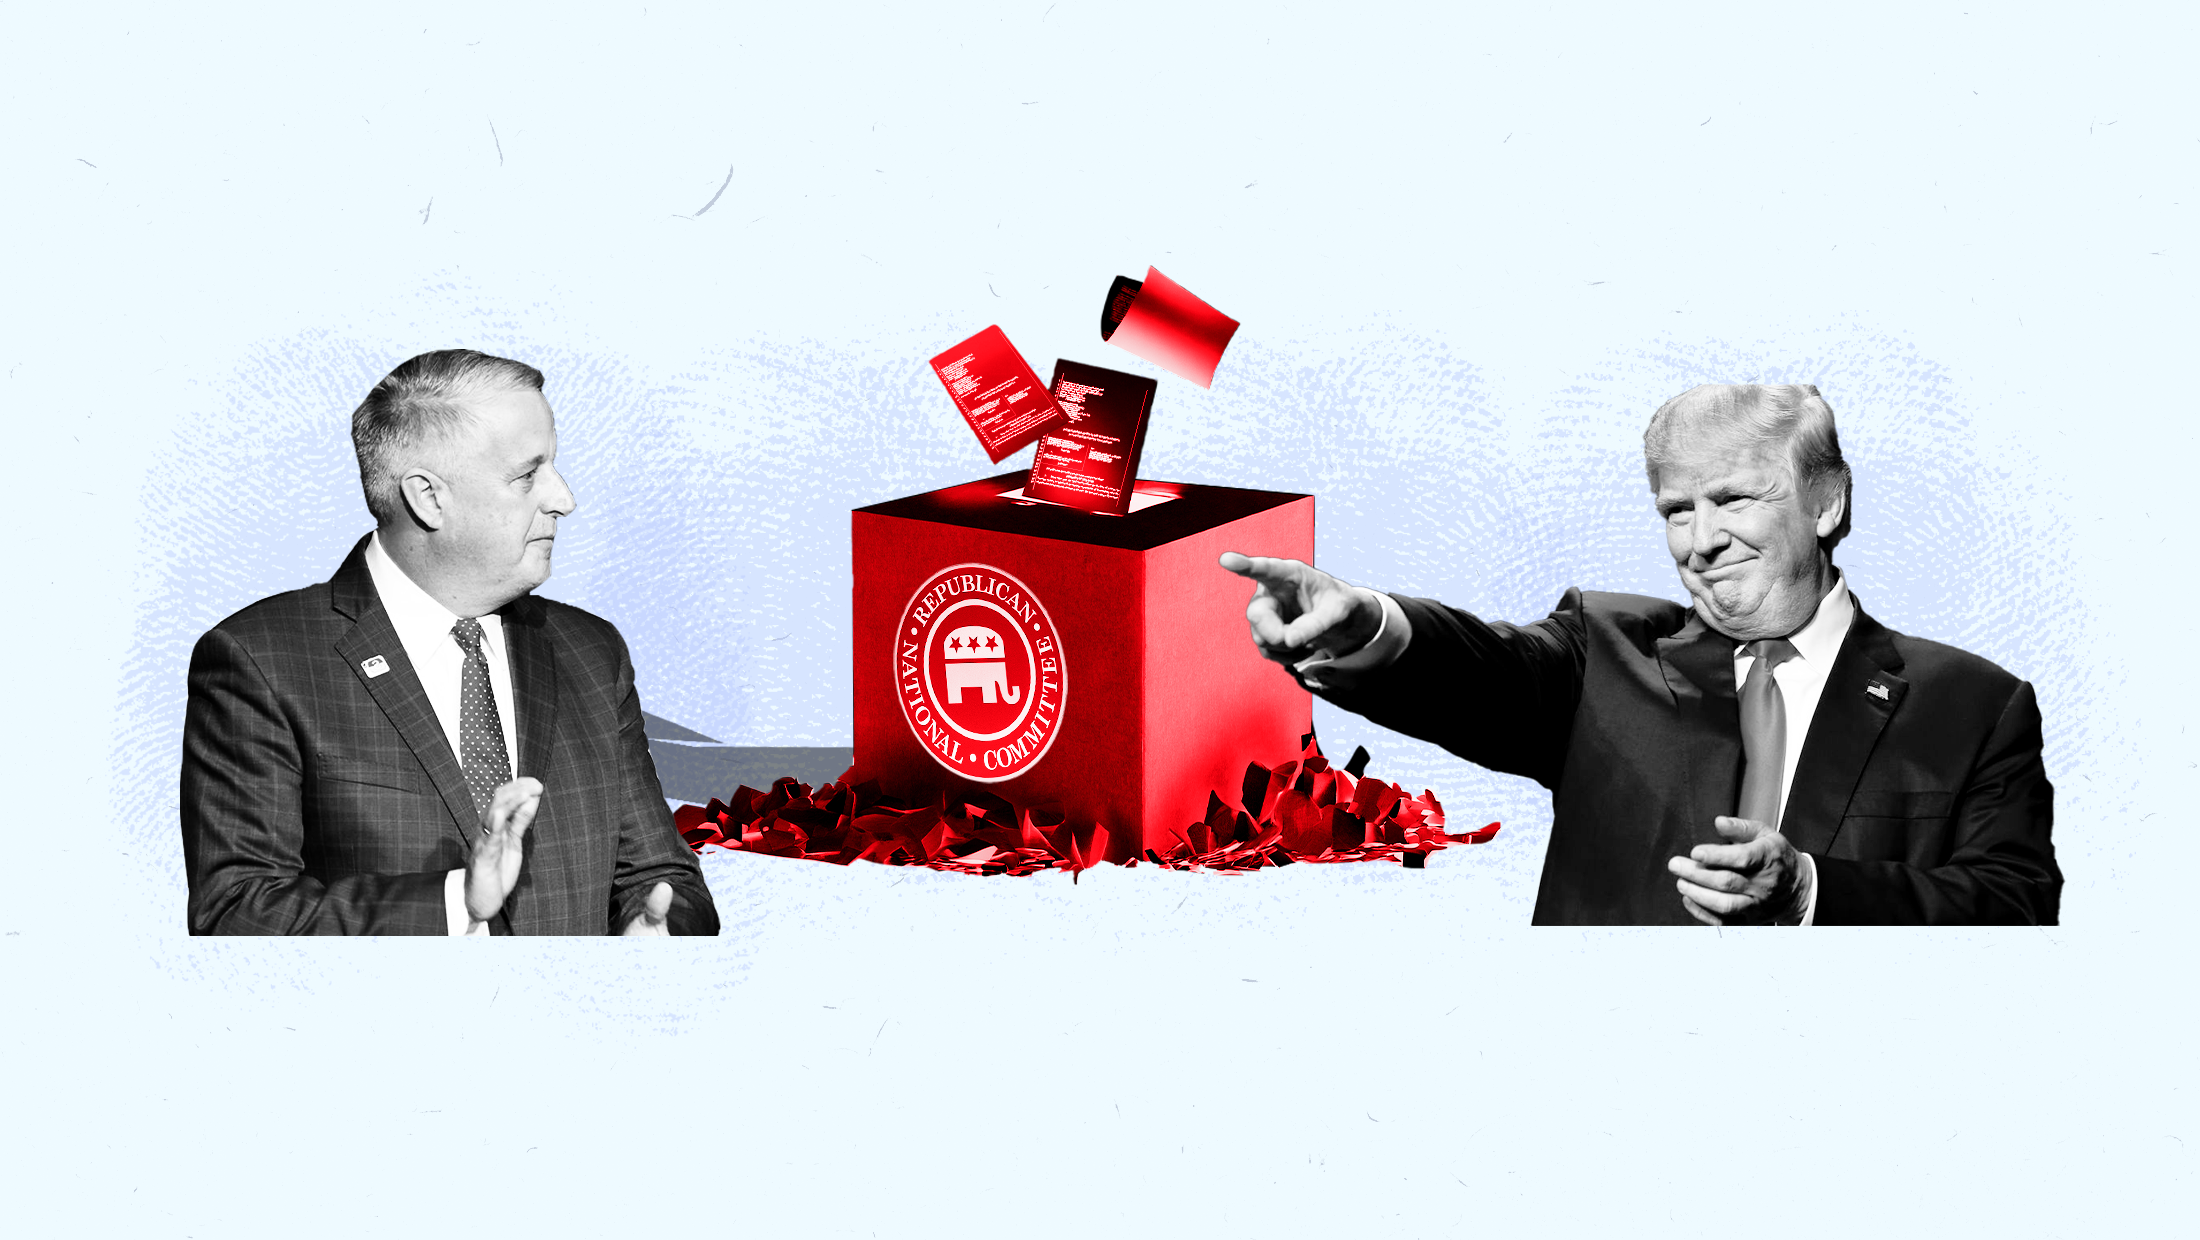 Light blue background with images of RNC Chair Michael Whatley and Donald Trump with a red ballot box that reads "Republican National Committee" on it with an elephant that has red-toned court documents coming out of the box.